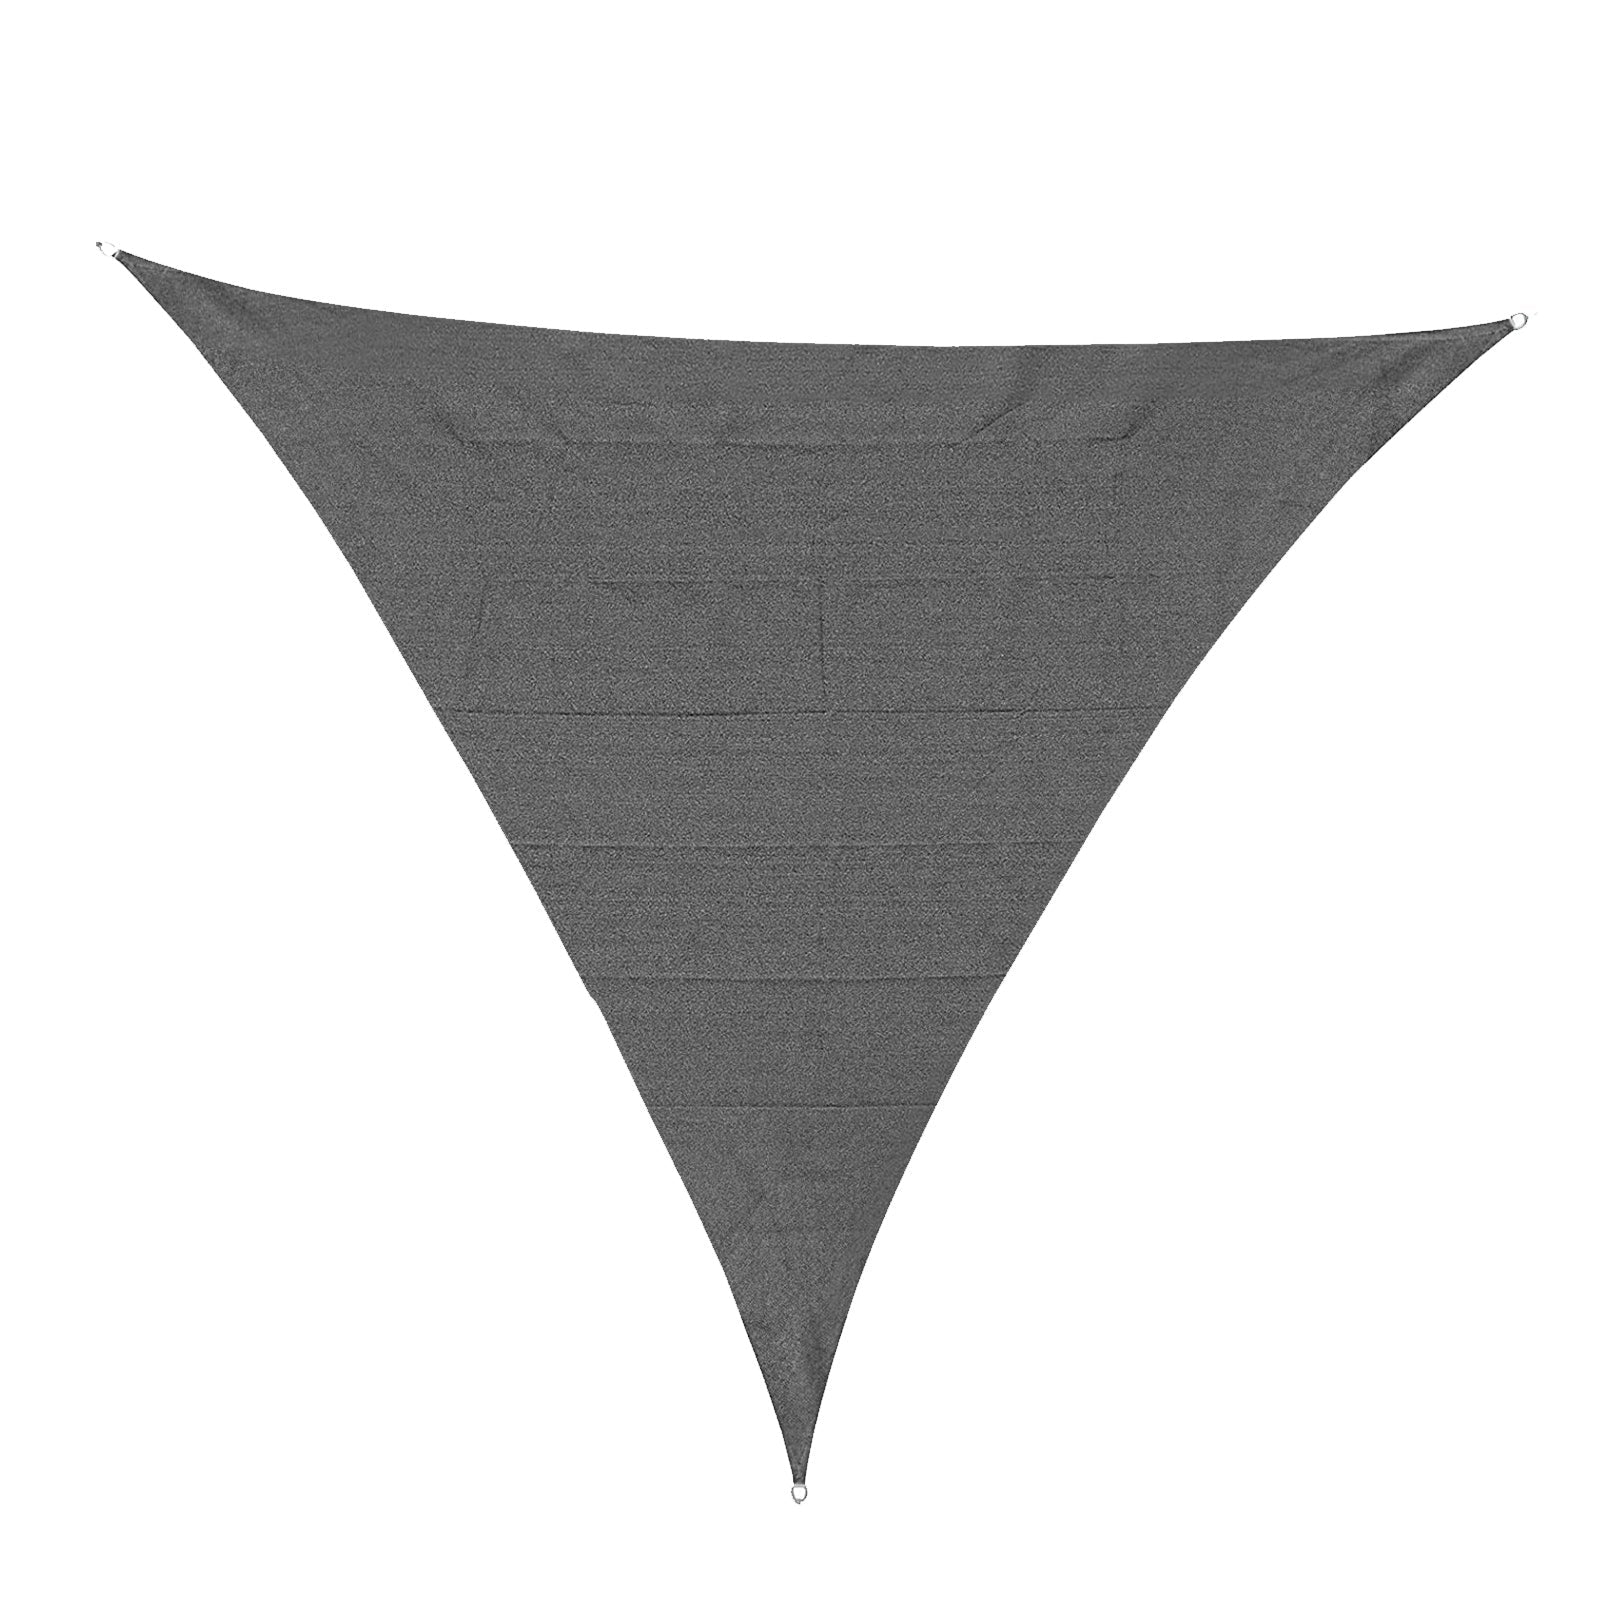 5x5m Triangle Sun Shade Sail Outdoor UV Protection Canopy w/ Steel Rings Ropes UV Block Outdoor Patio Shelter Grey-0